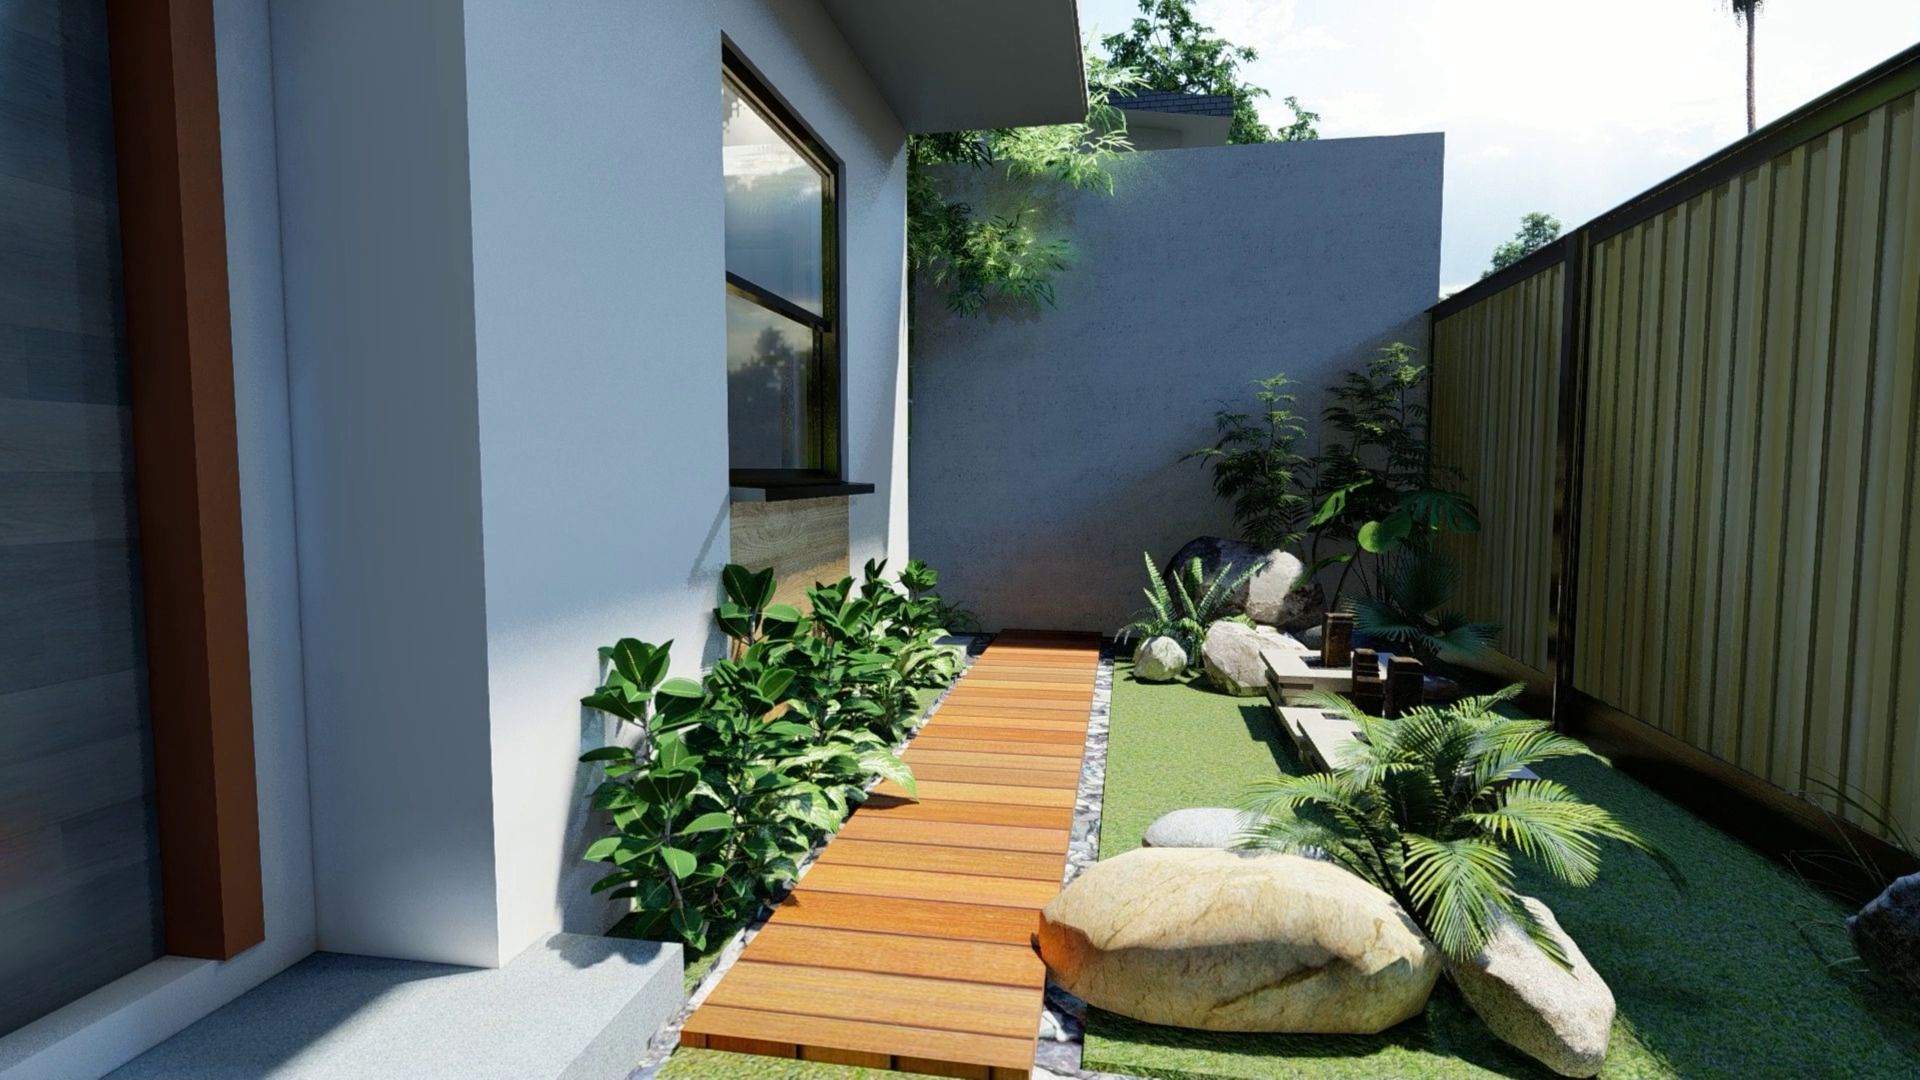 The Significant Reasons For Landscape Designs Are Important - John Ambridge | Tealfeed